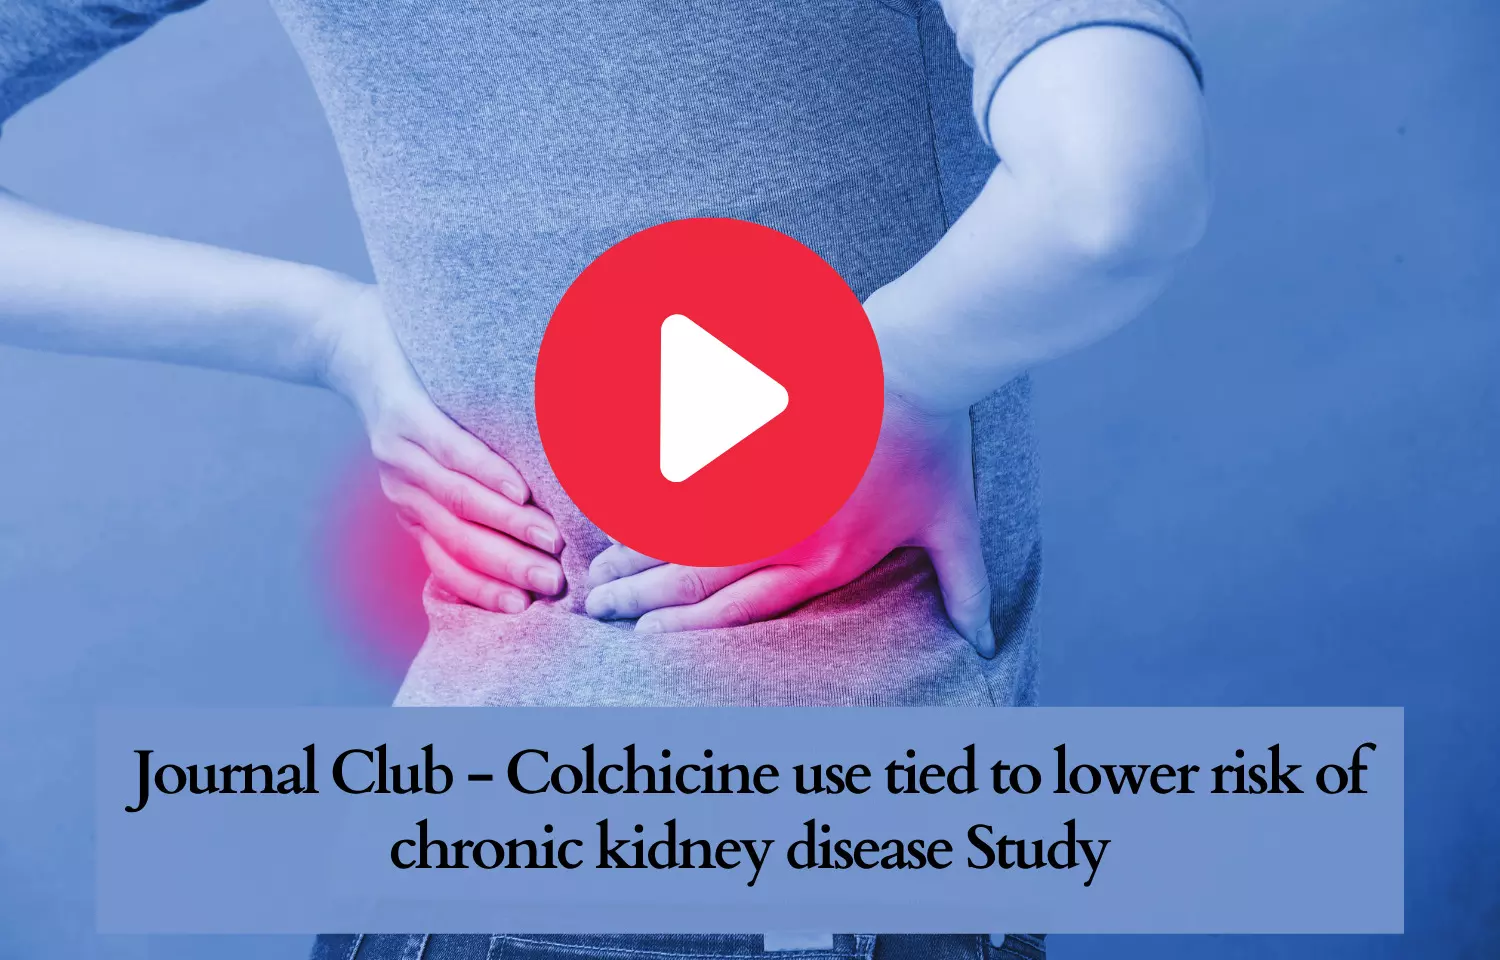 Journal Club - Colchicine use tied to lower risk of chronic kidney disease Study